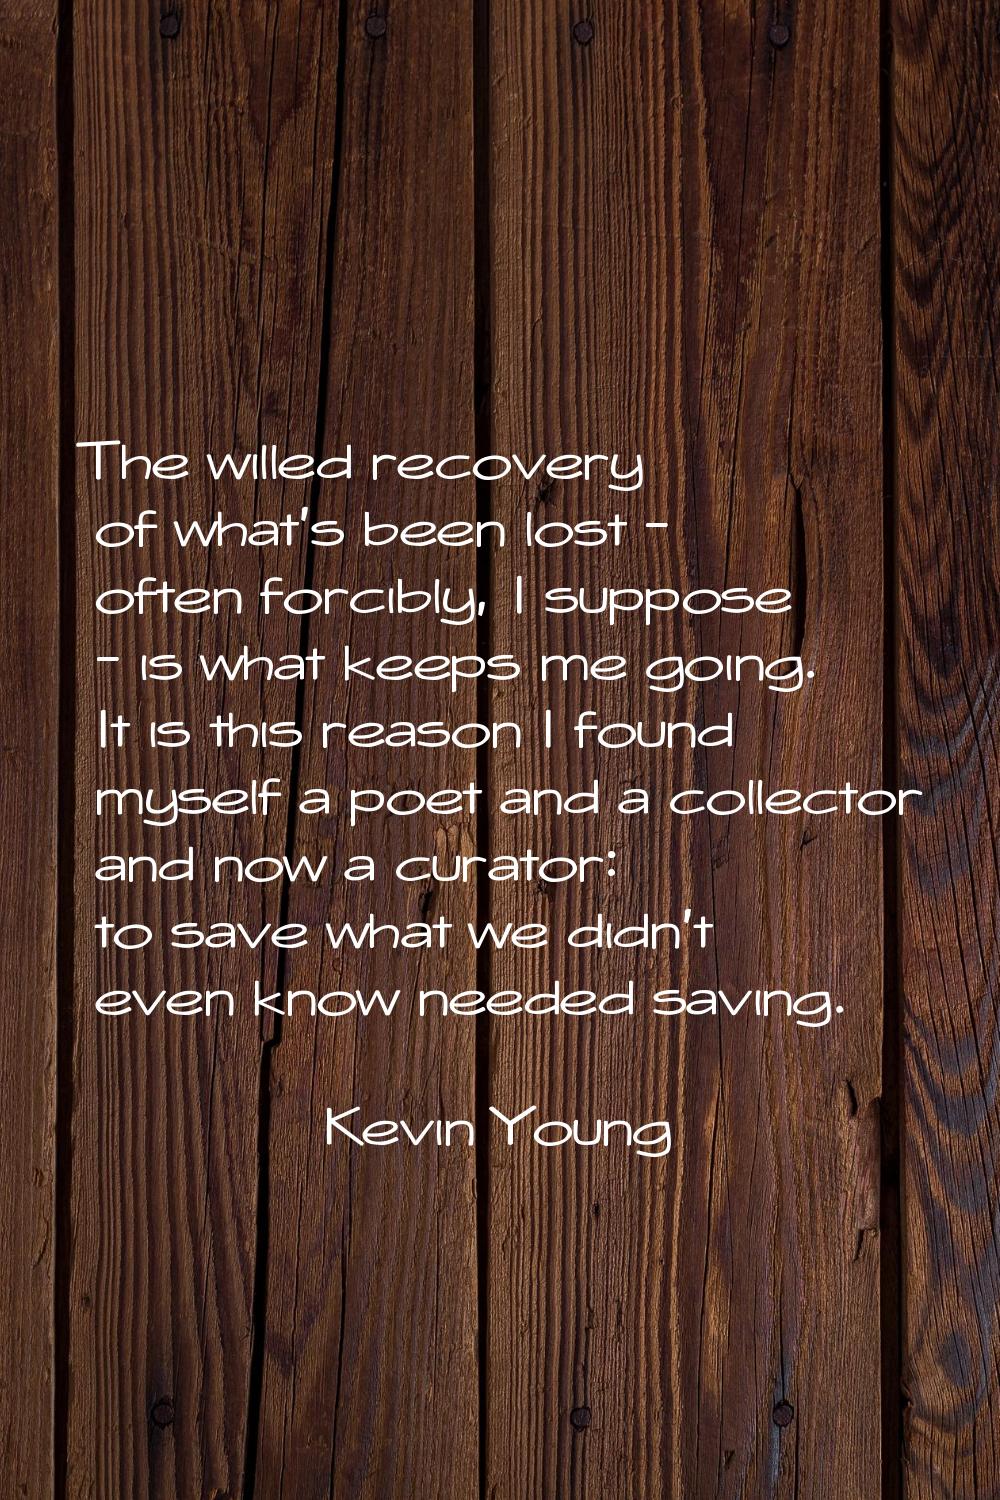 The willed recovery of what's been lost - often forcibly, I suppose - is what keeps me going. It is